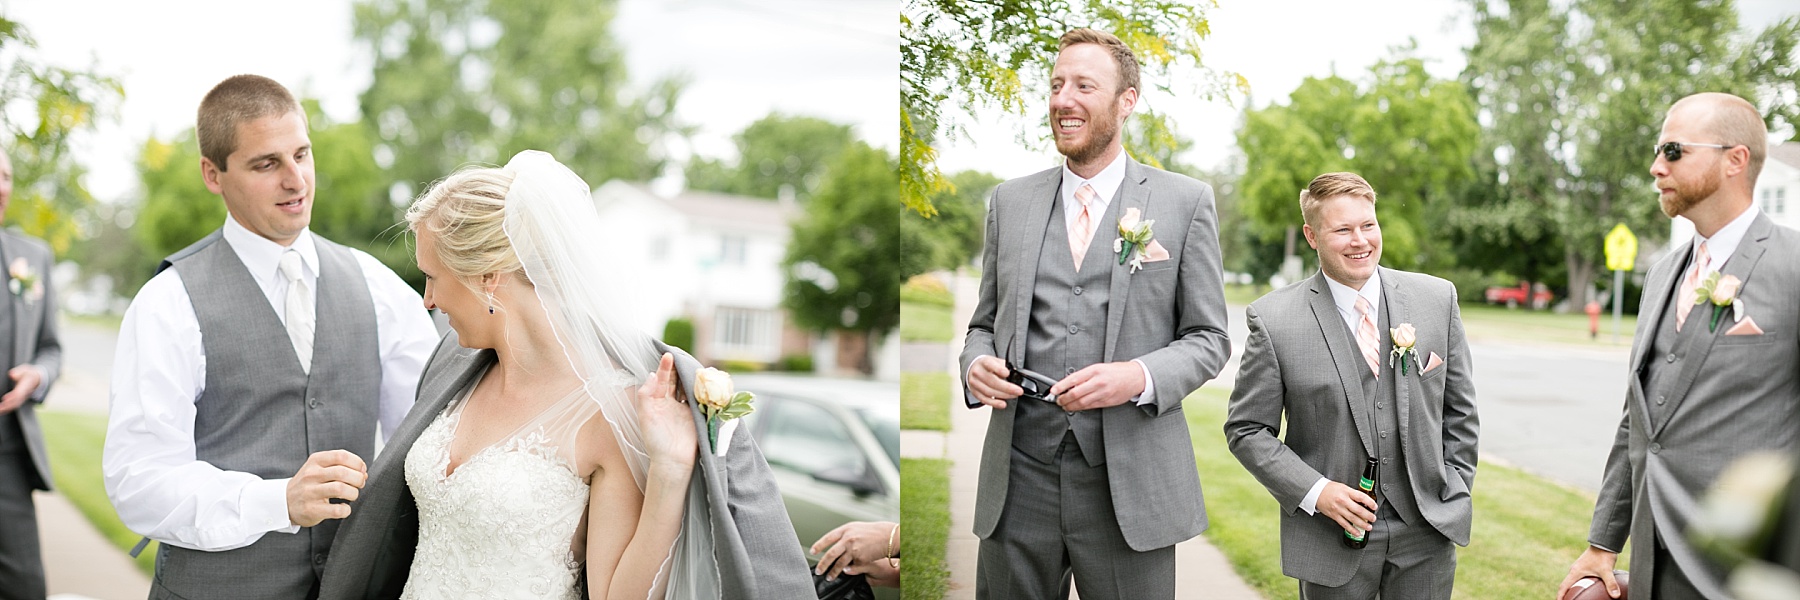 They met at a honky tonk in Nashville, he grabbed her hand on the dance floor and it sealed the deal. This past Saturday they were married in a summer Eau Claire, Wisconsin wedding.